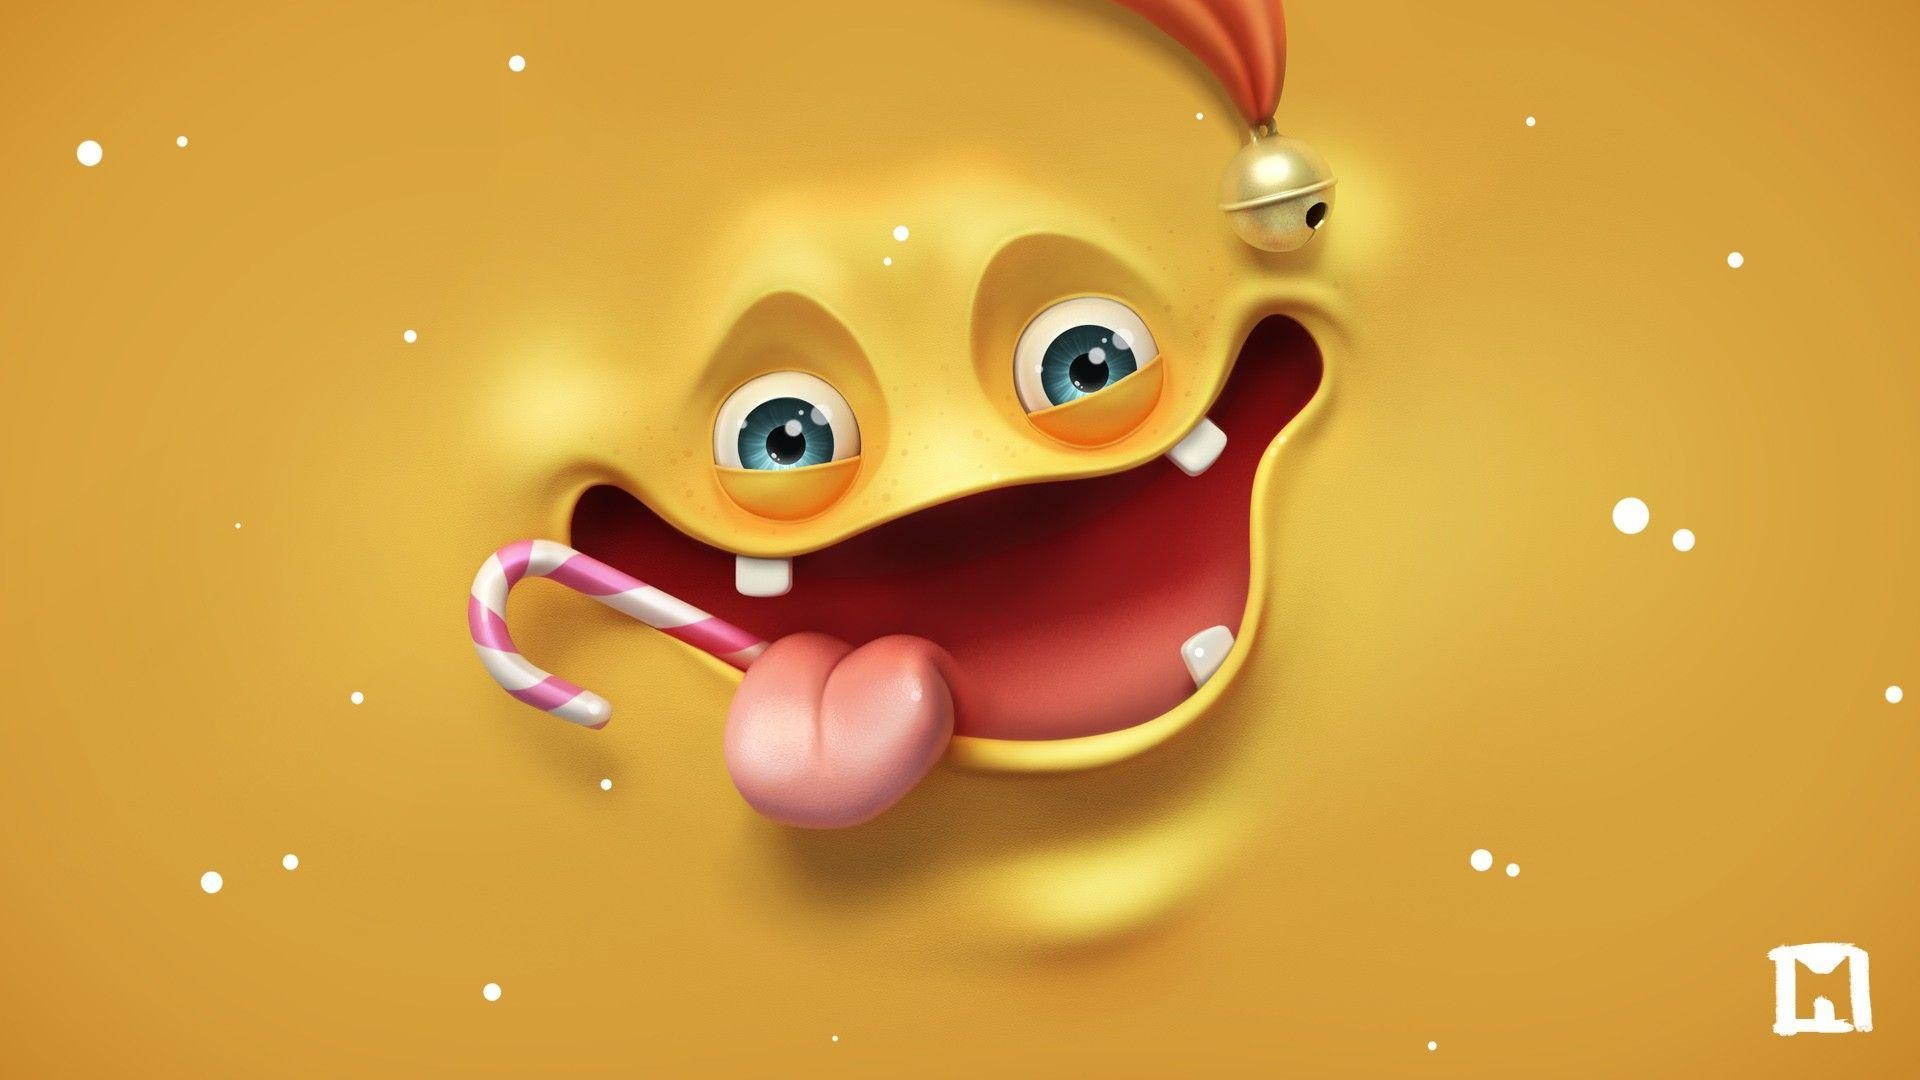 1920x1080 Funny Face HD 1080p Wallpapers Download | HD Wallpapers Source